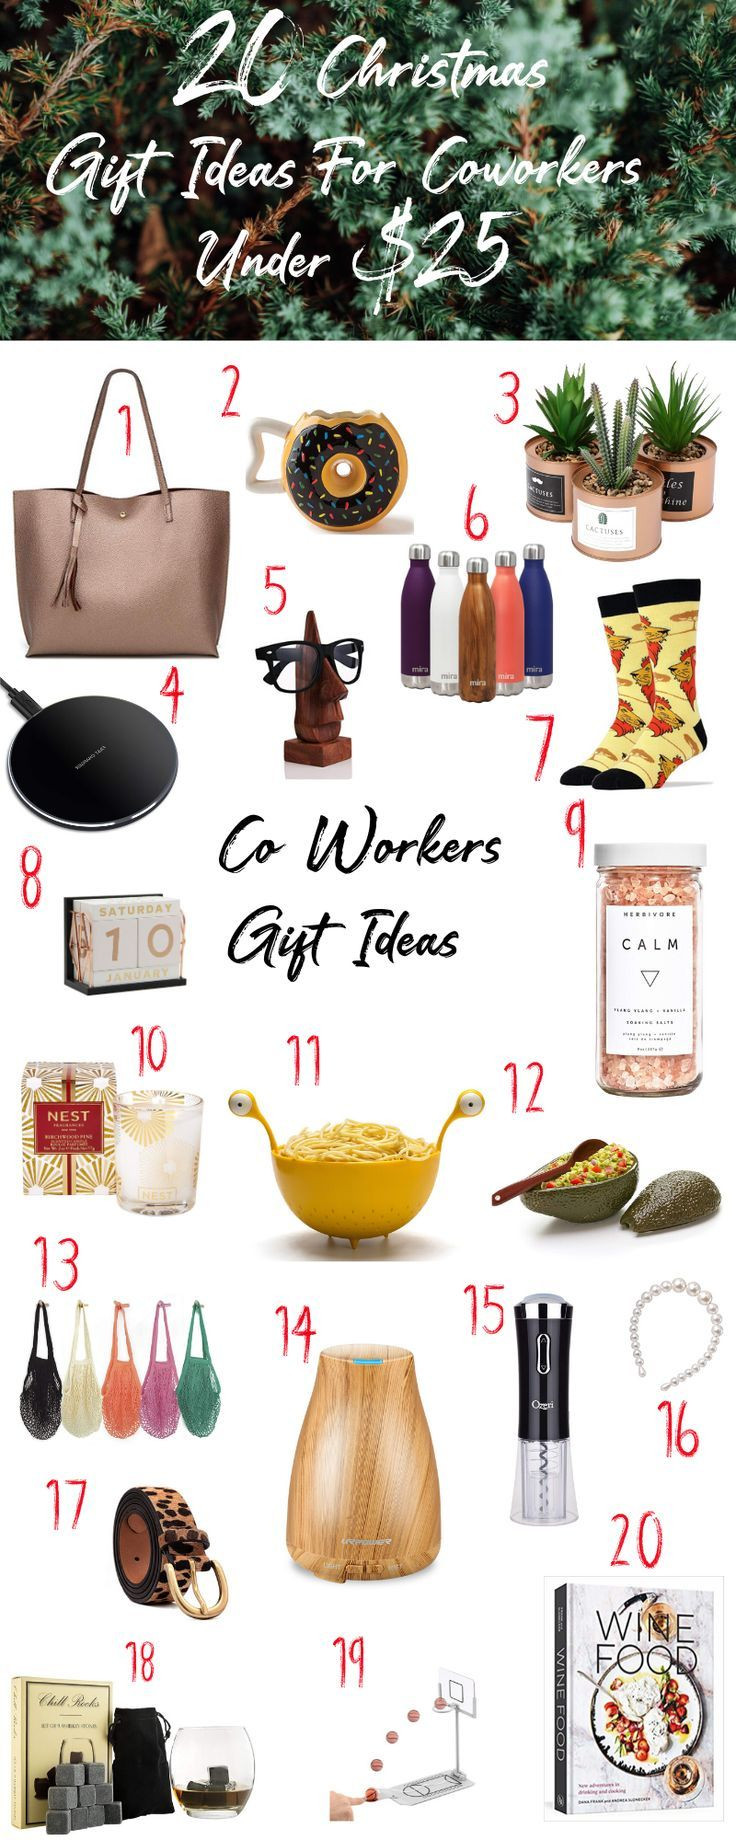 Office Holiday Gift Ideas Under 20
 20 Christmas Gift Ideas For You Co Workers Under $25